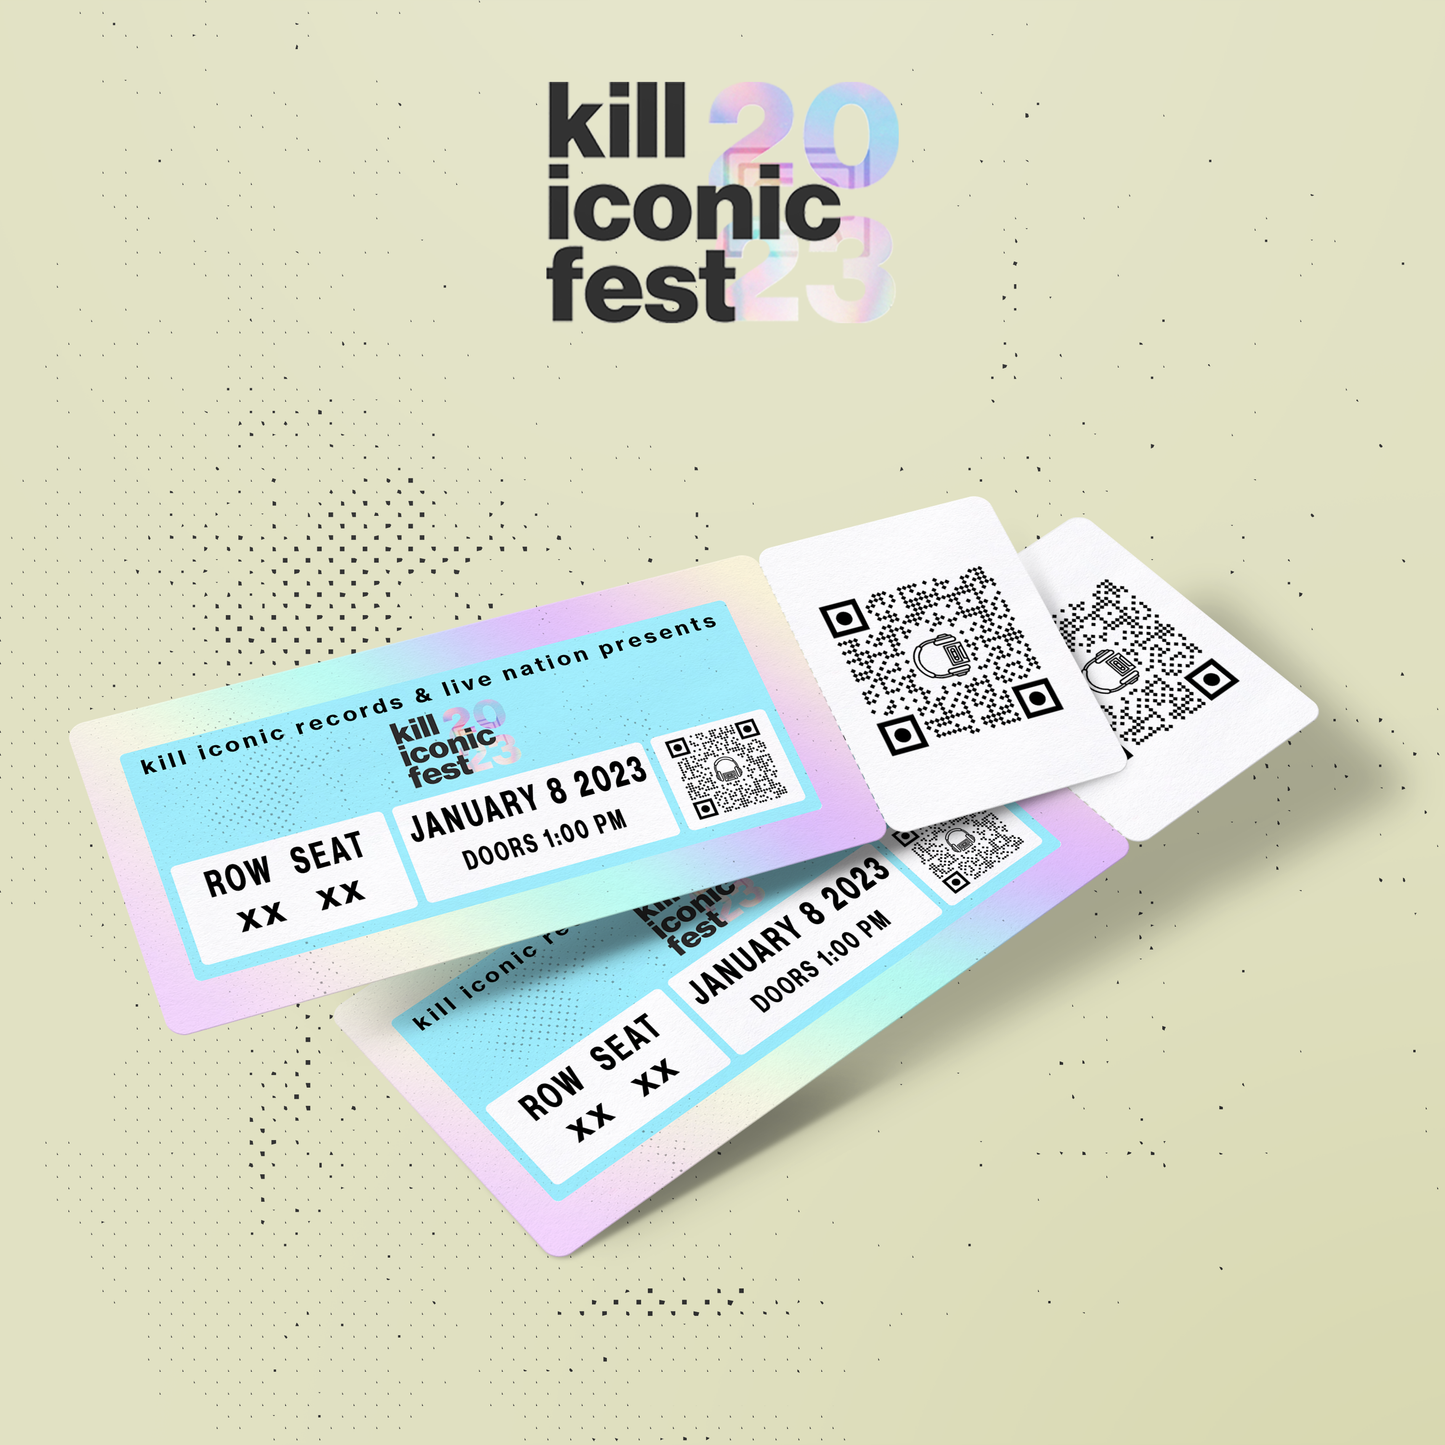 kill iconic fest - General Admission (Presale) - MORE AVAILABLE FRIDAY